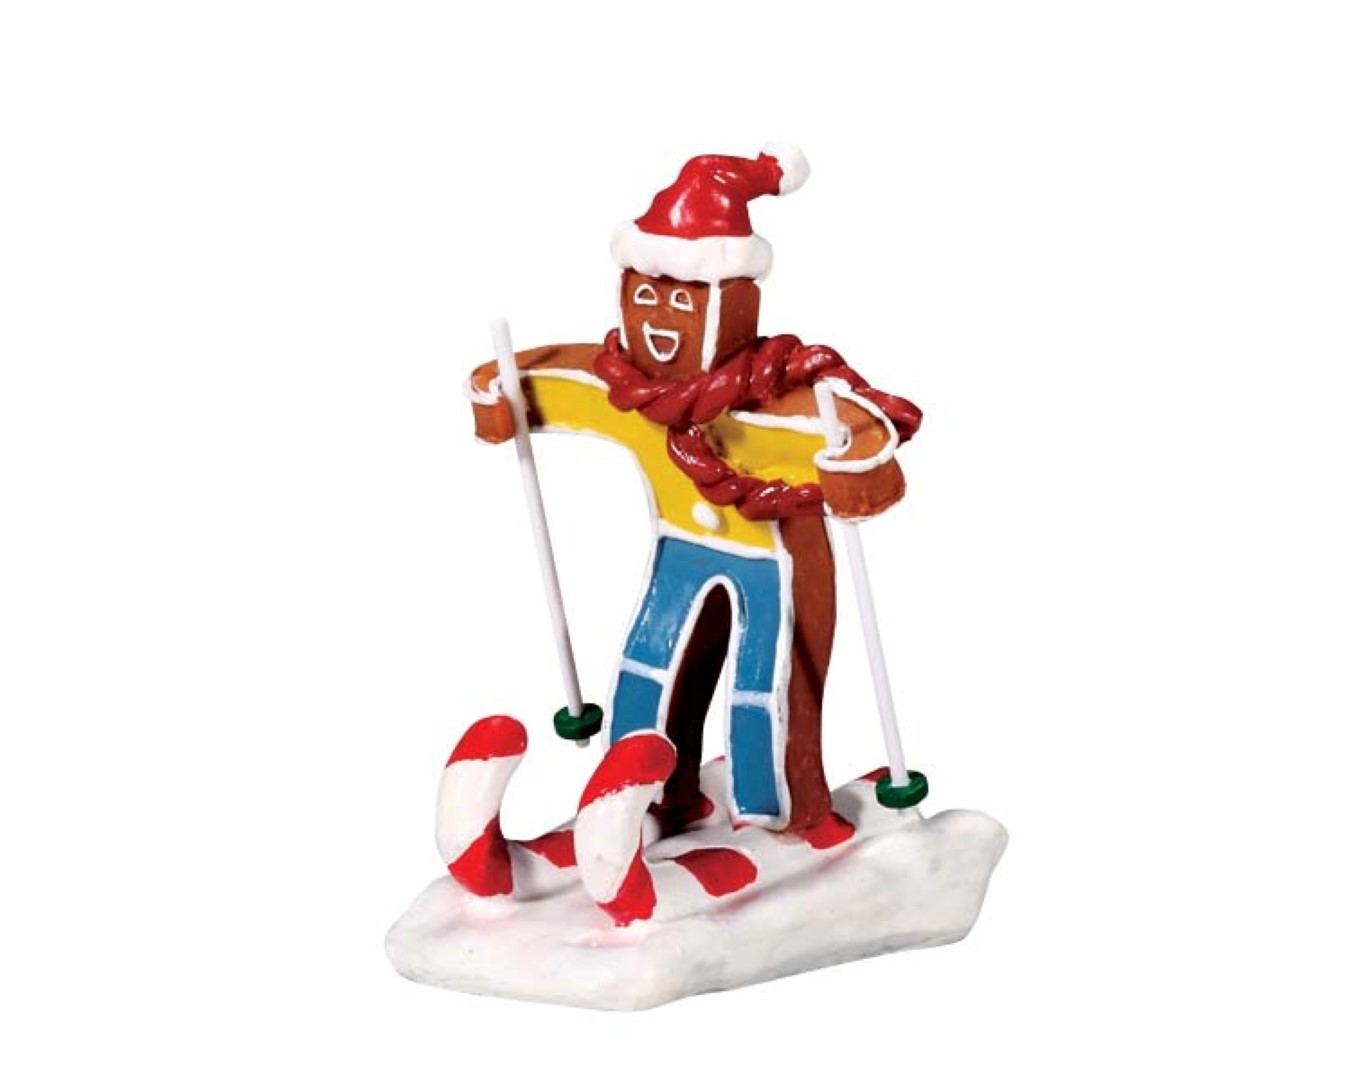 Candy cane skier